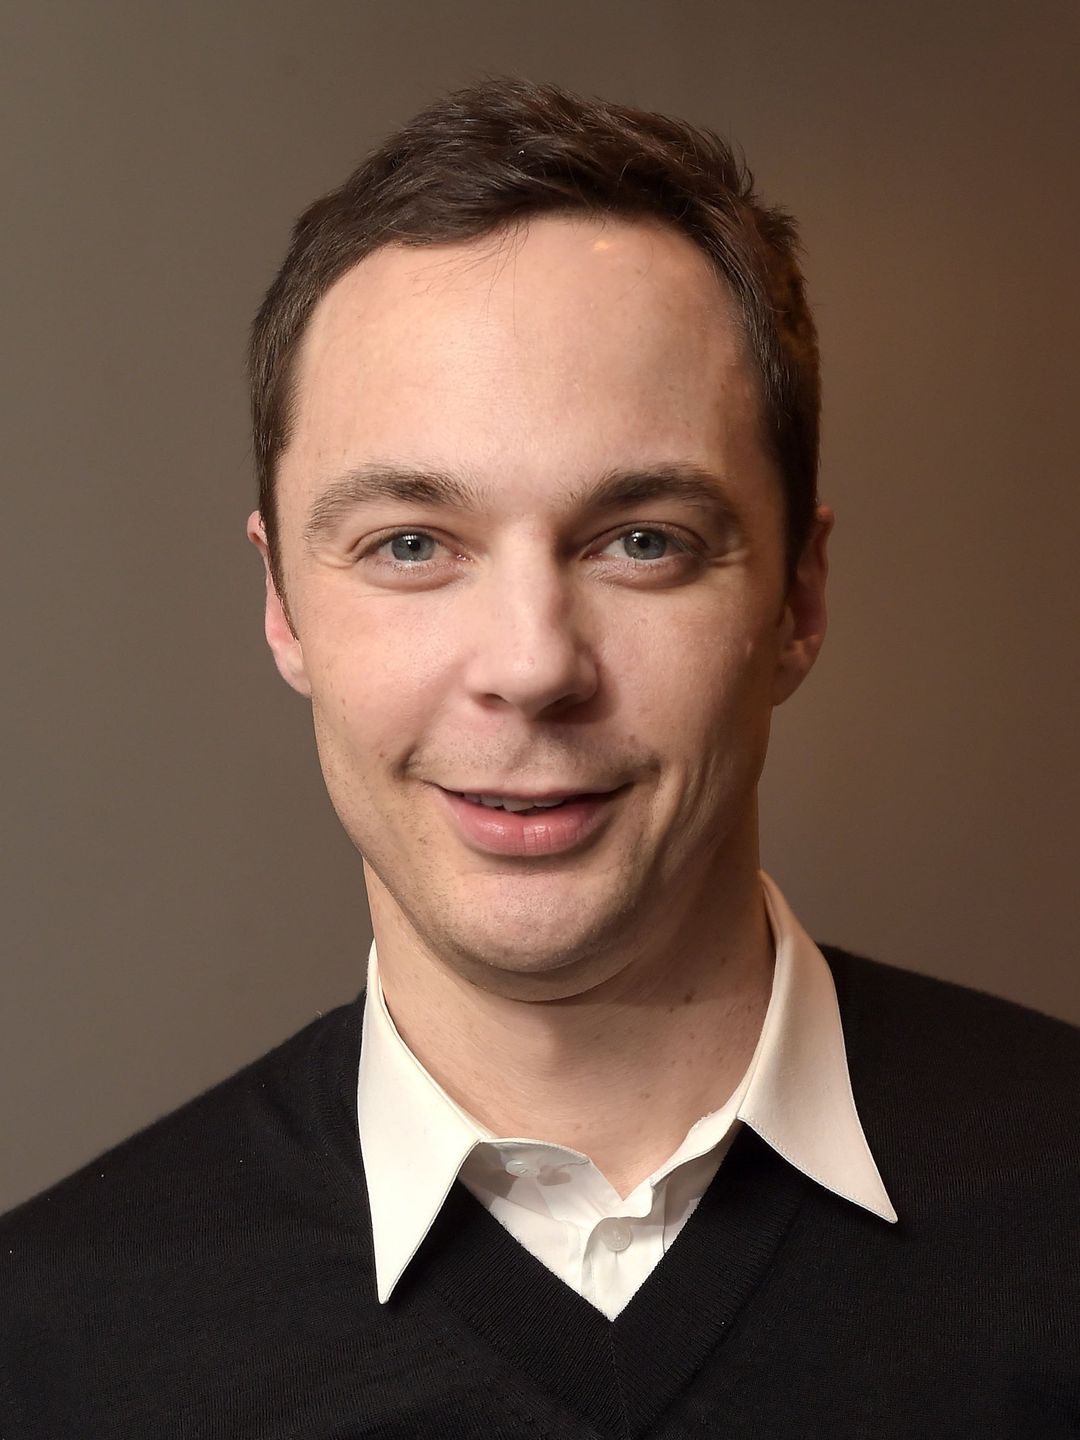 Jim Parsons does he have a wife